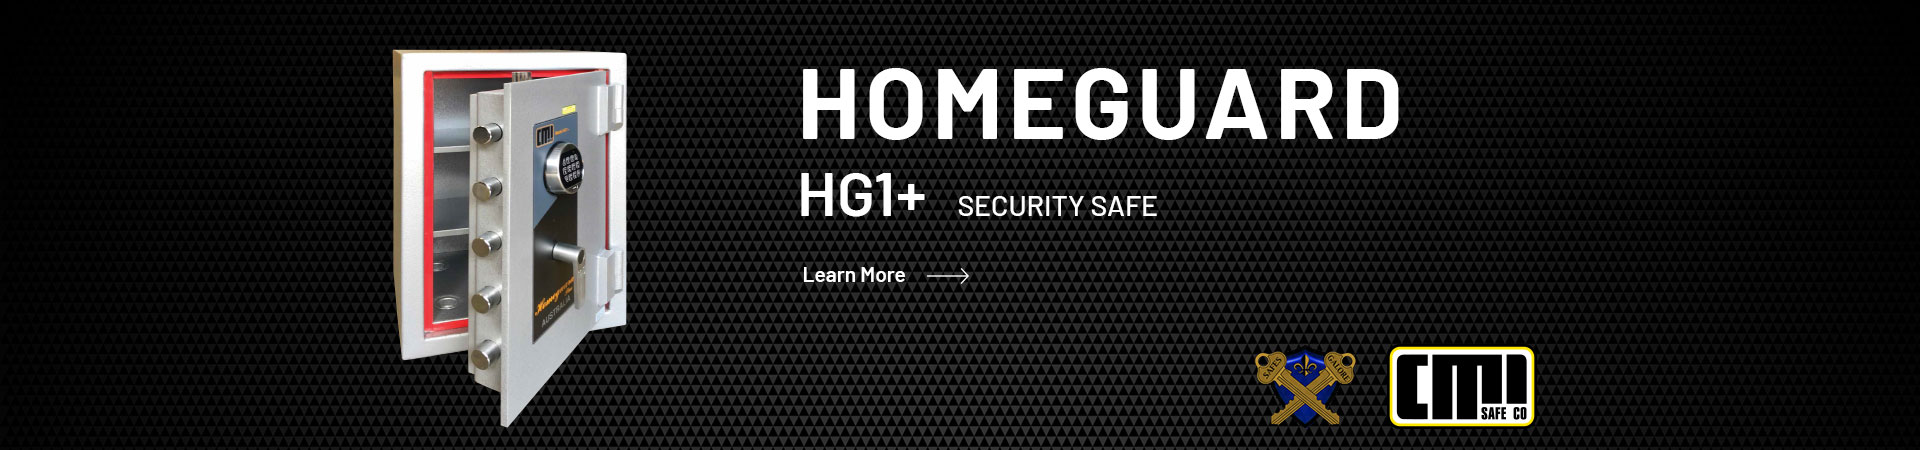 View the Homeguard Plus 1 Home Office Safe